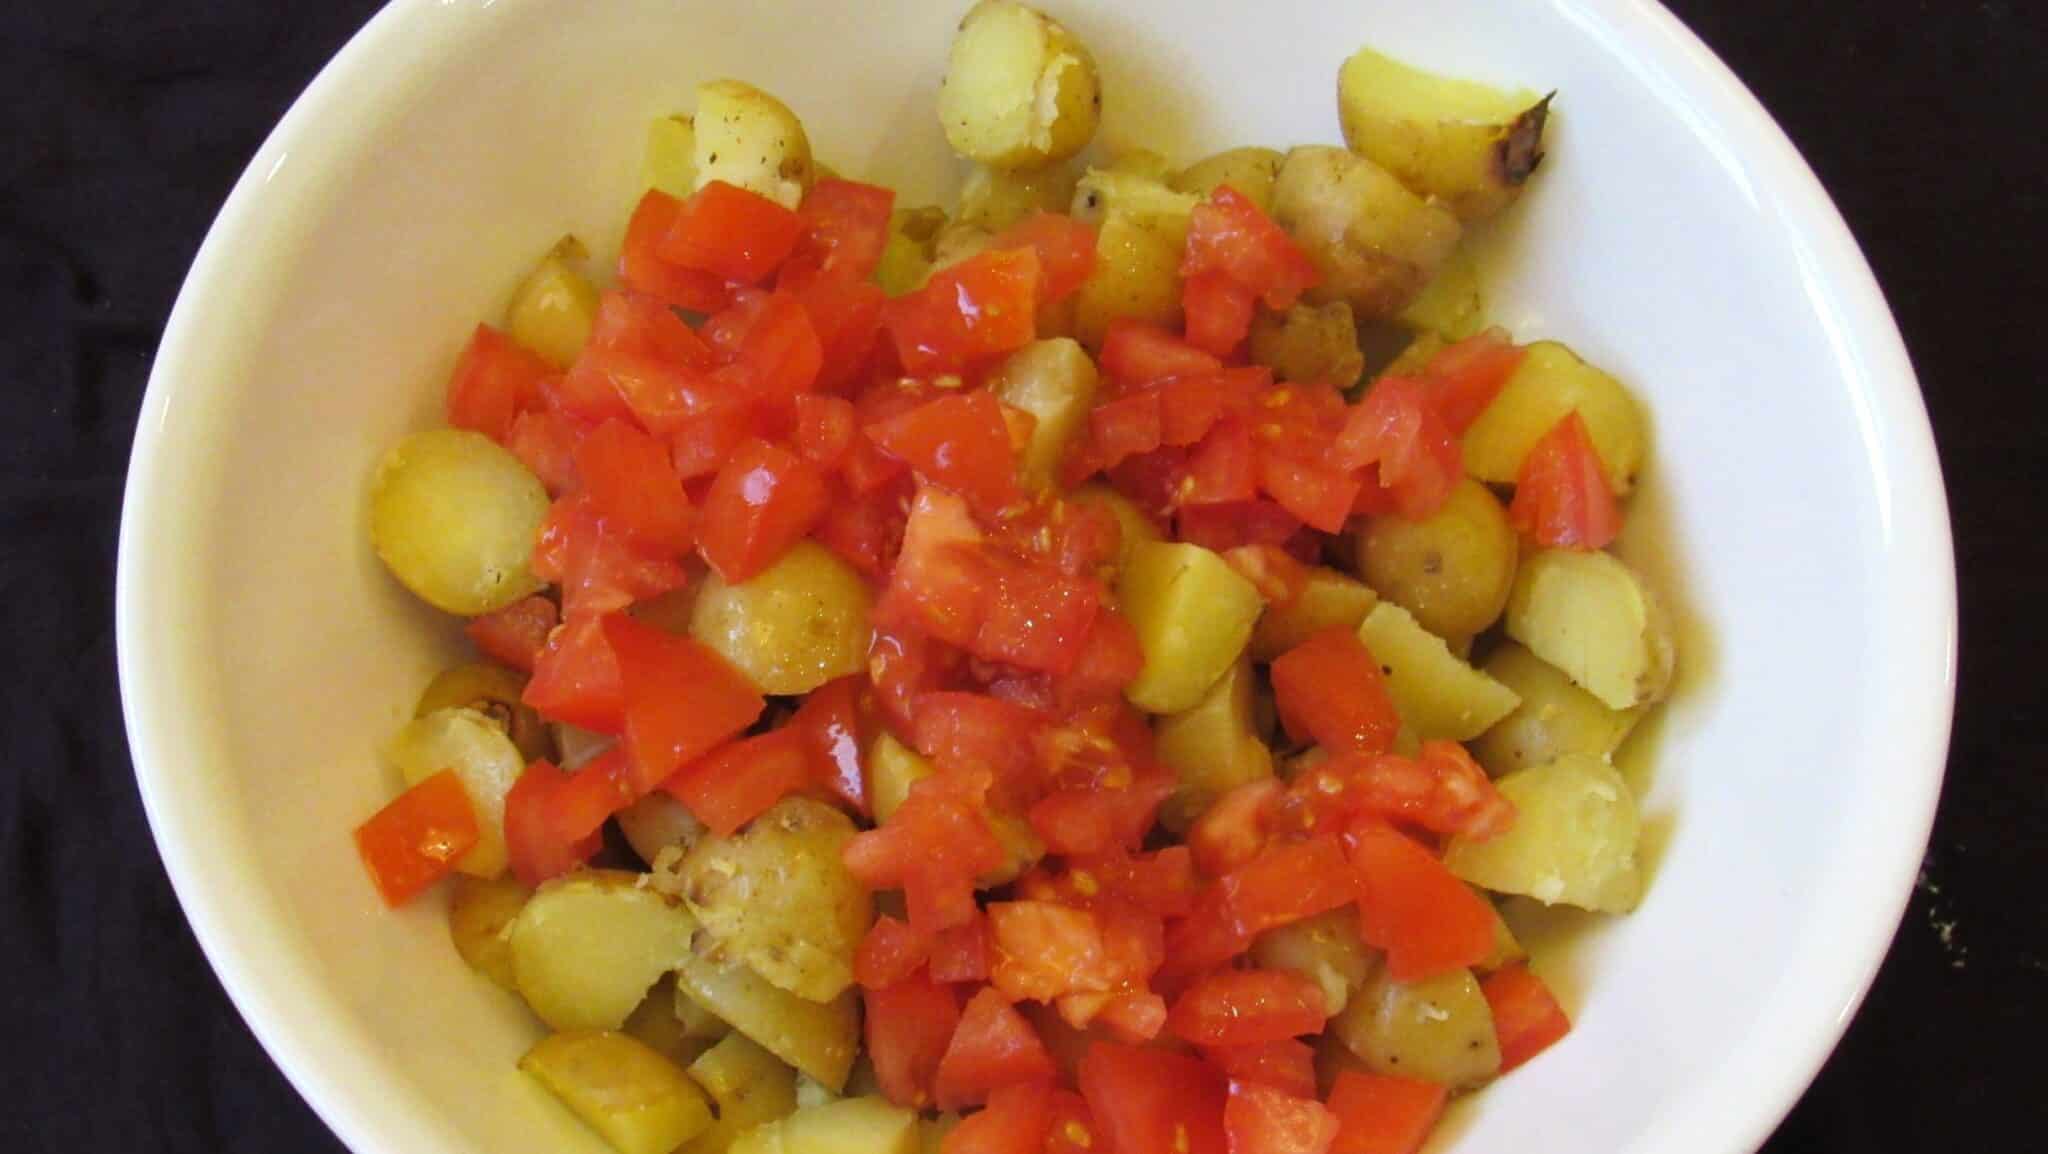 Diced cooked potatoes and diced tomatoes in a white bowl.